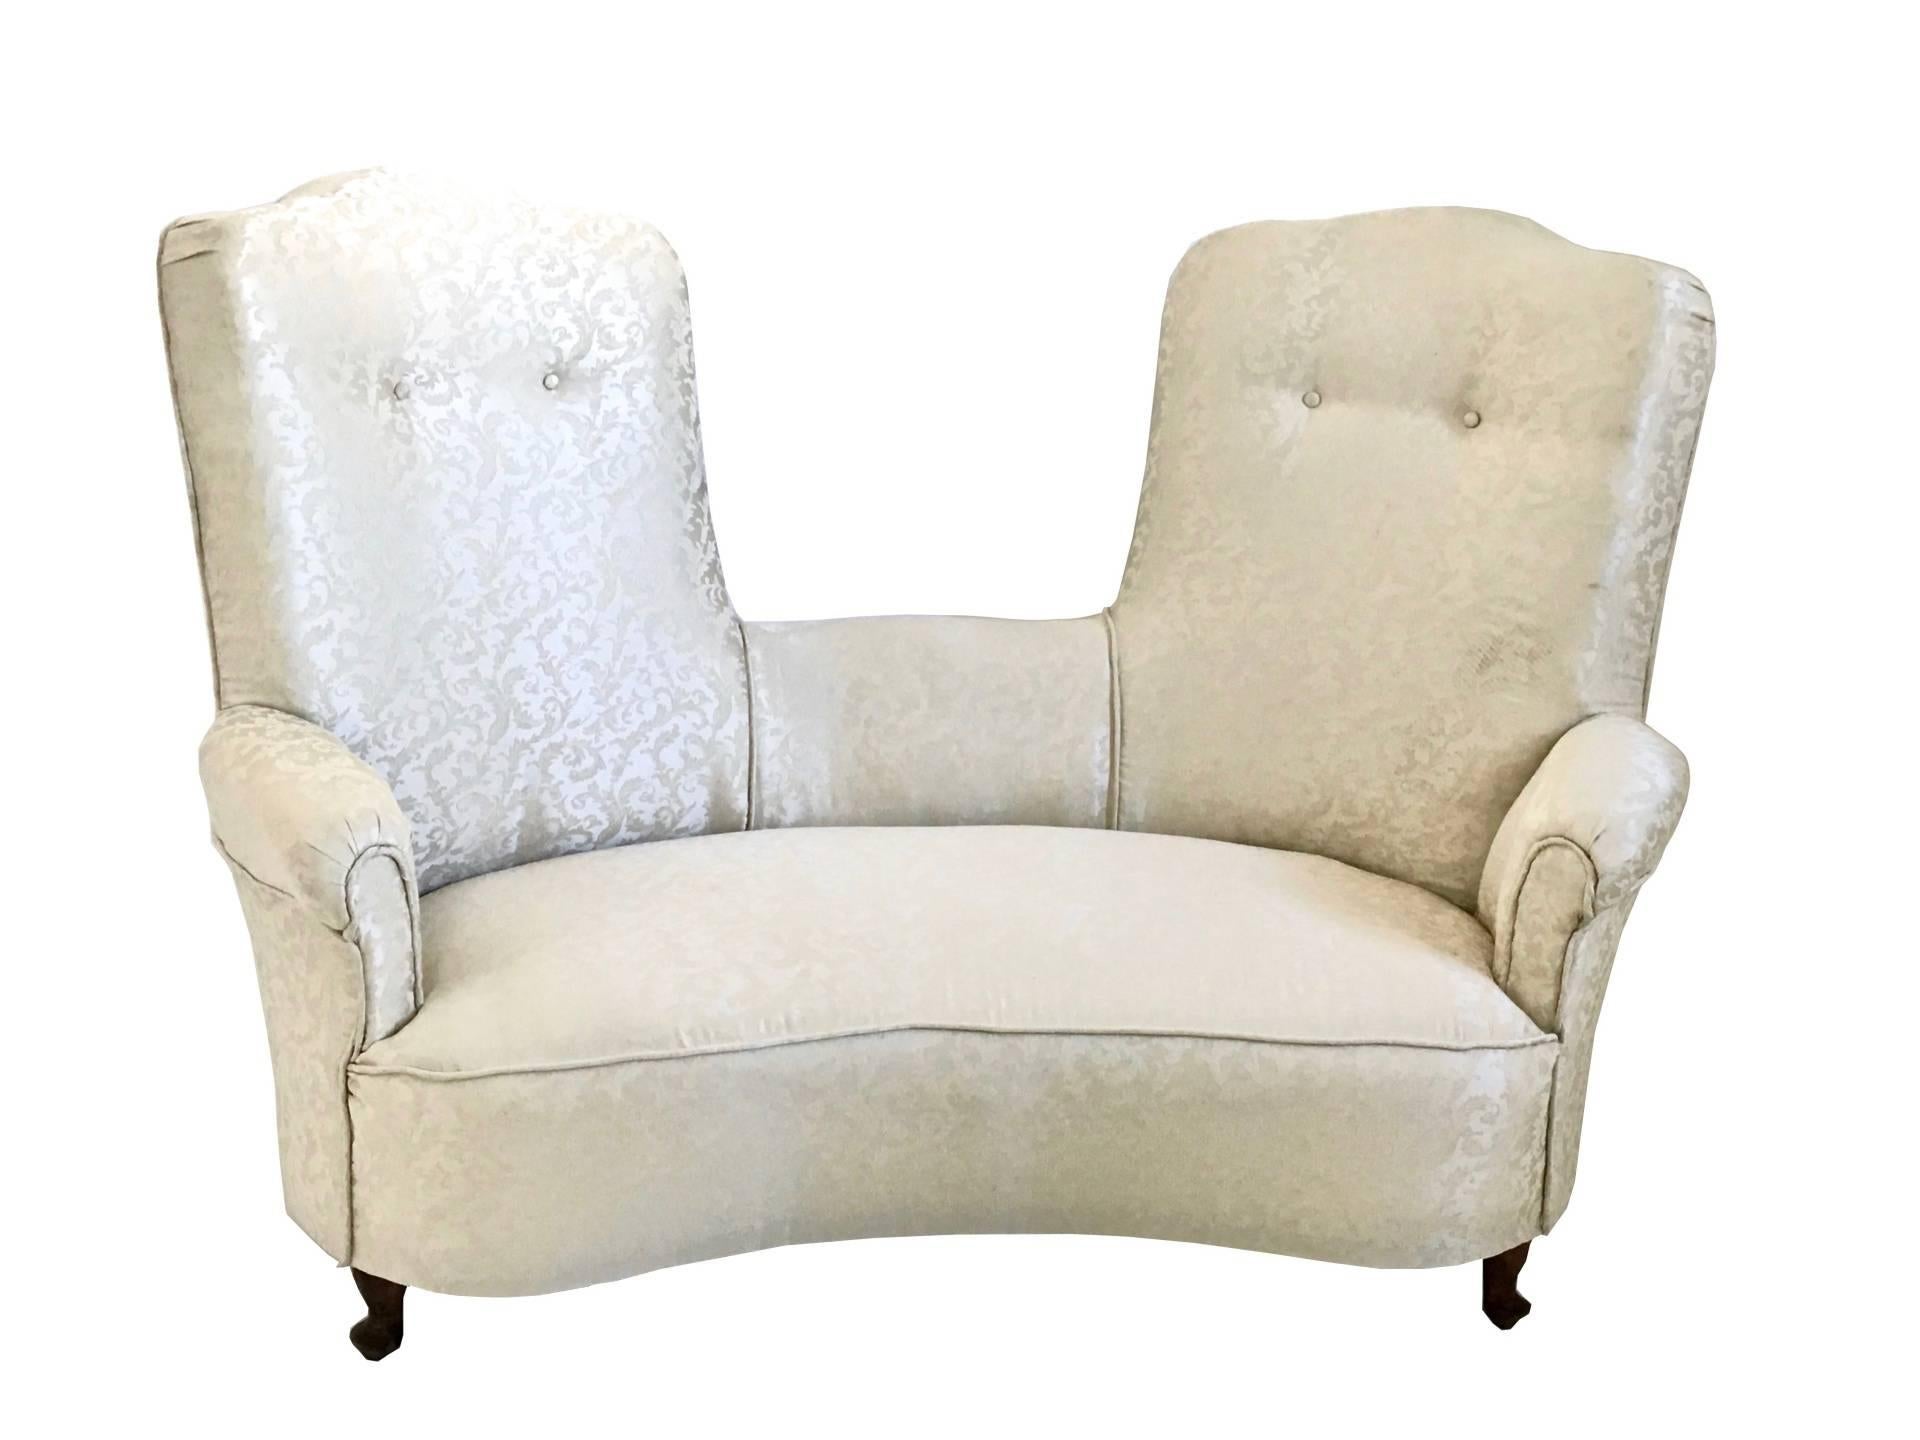 It has wooden legs and its padding is upholstered in fabric, which has been recently changed.
In excellent condition.